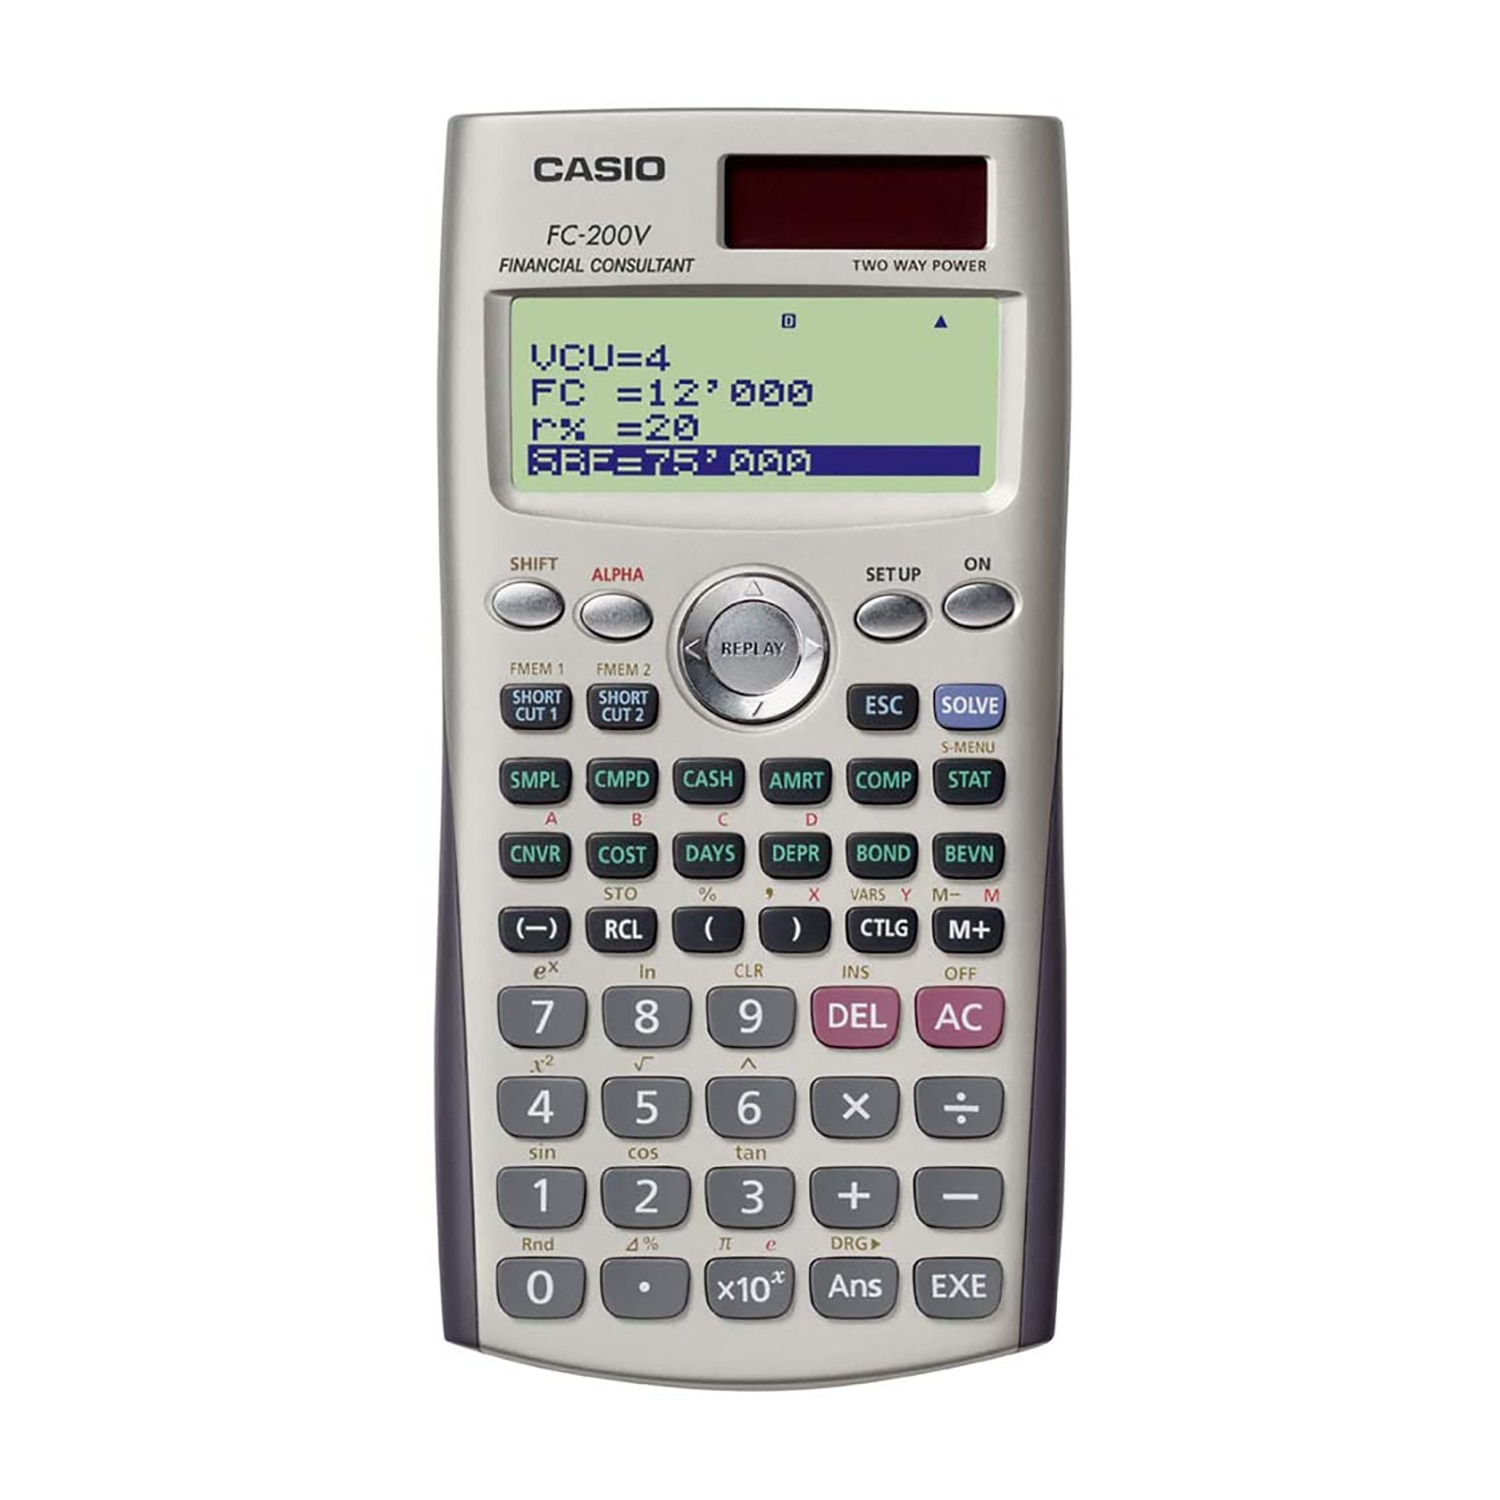 Choose this Casio Financial Calculator for your home or work needs. You can use it for both basic math and for advanced financial matters, too. Save time on addition, subtraction and division by simply putting in the numbers and hitting the result ke